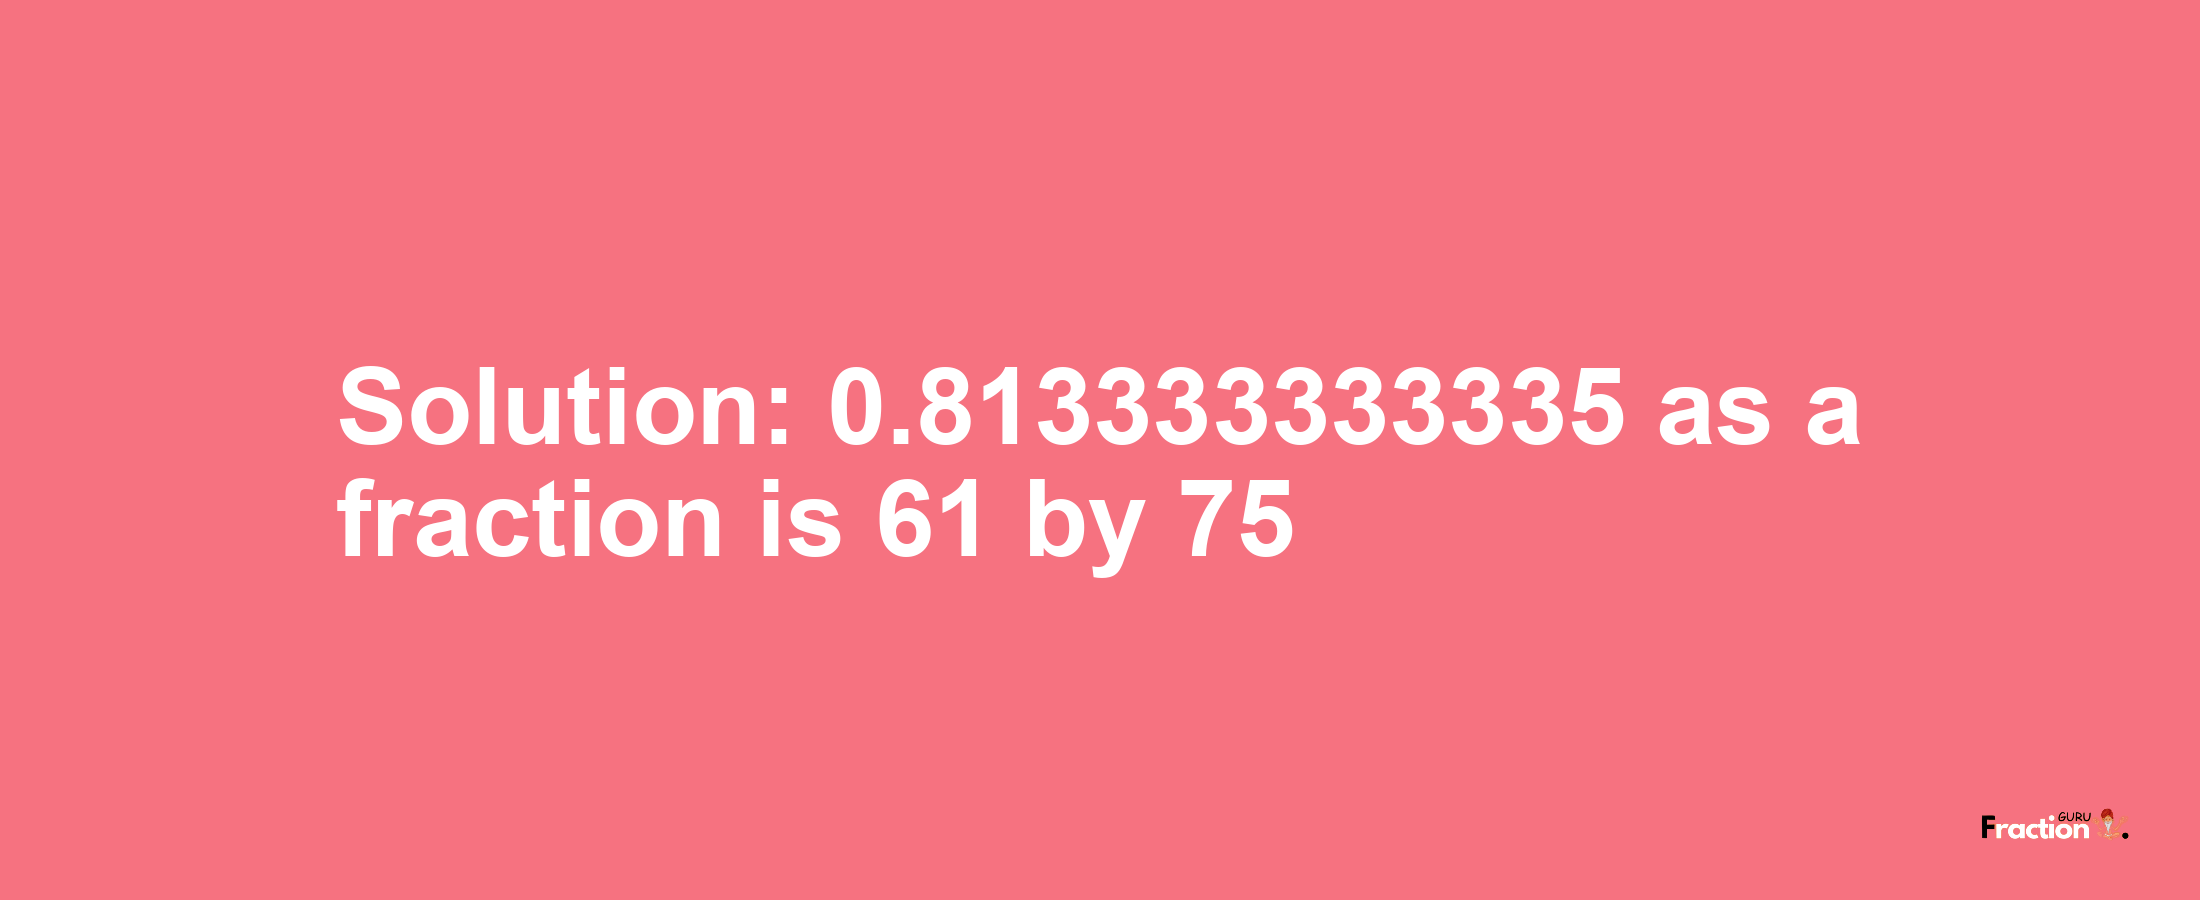 Solution:0.813333333335 as a fraction is 61/75